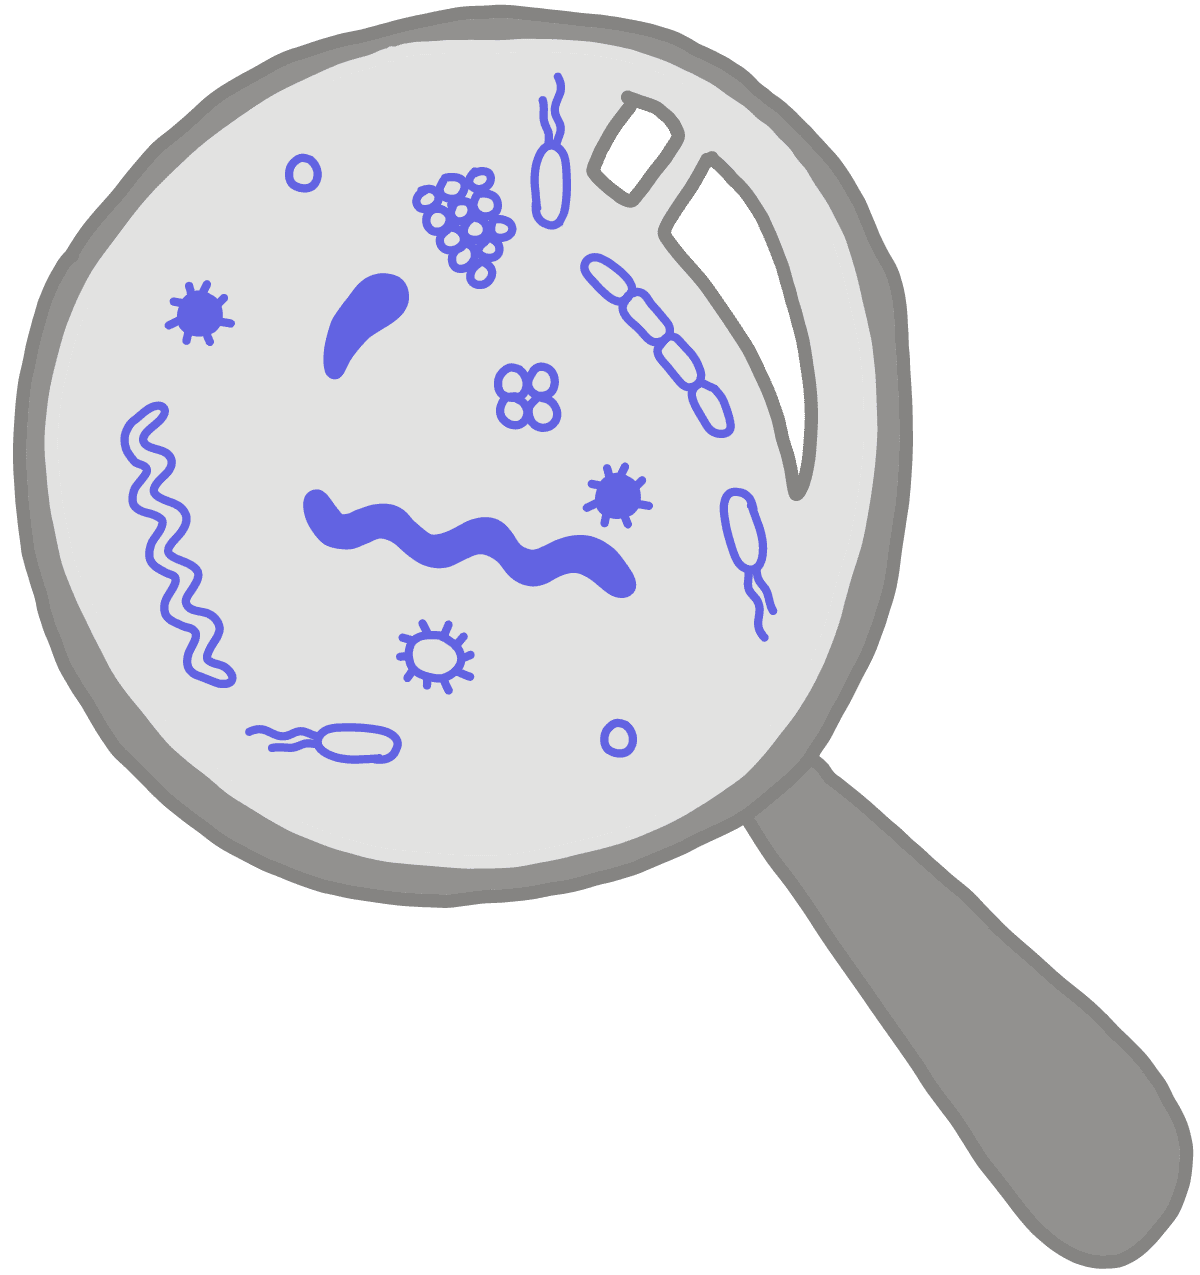 Image of a magnifying glass enlarging an image of blue microbes